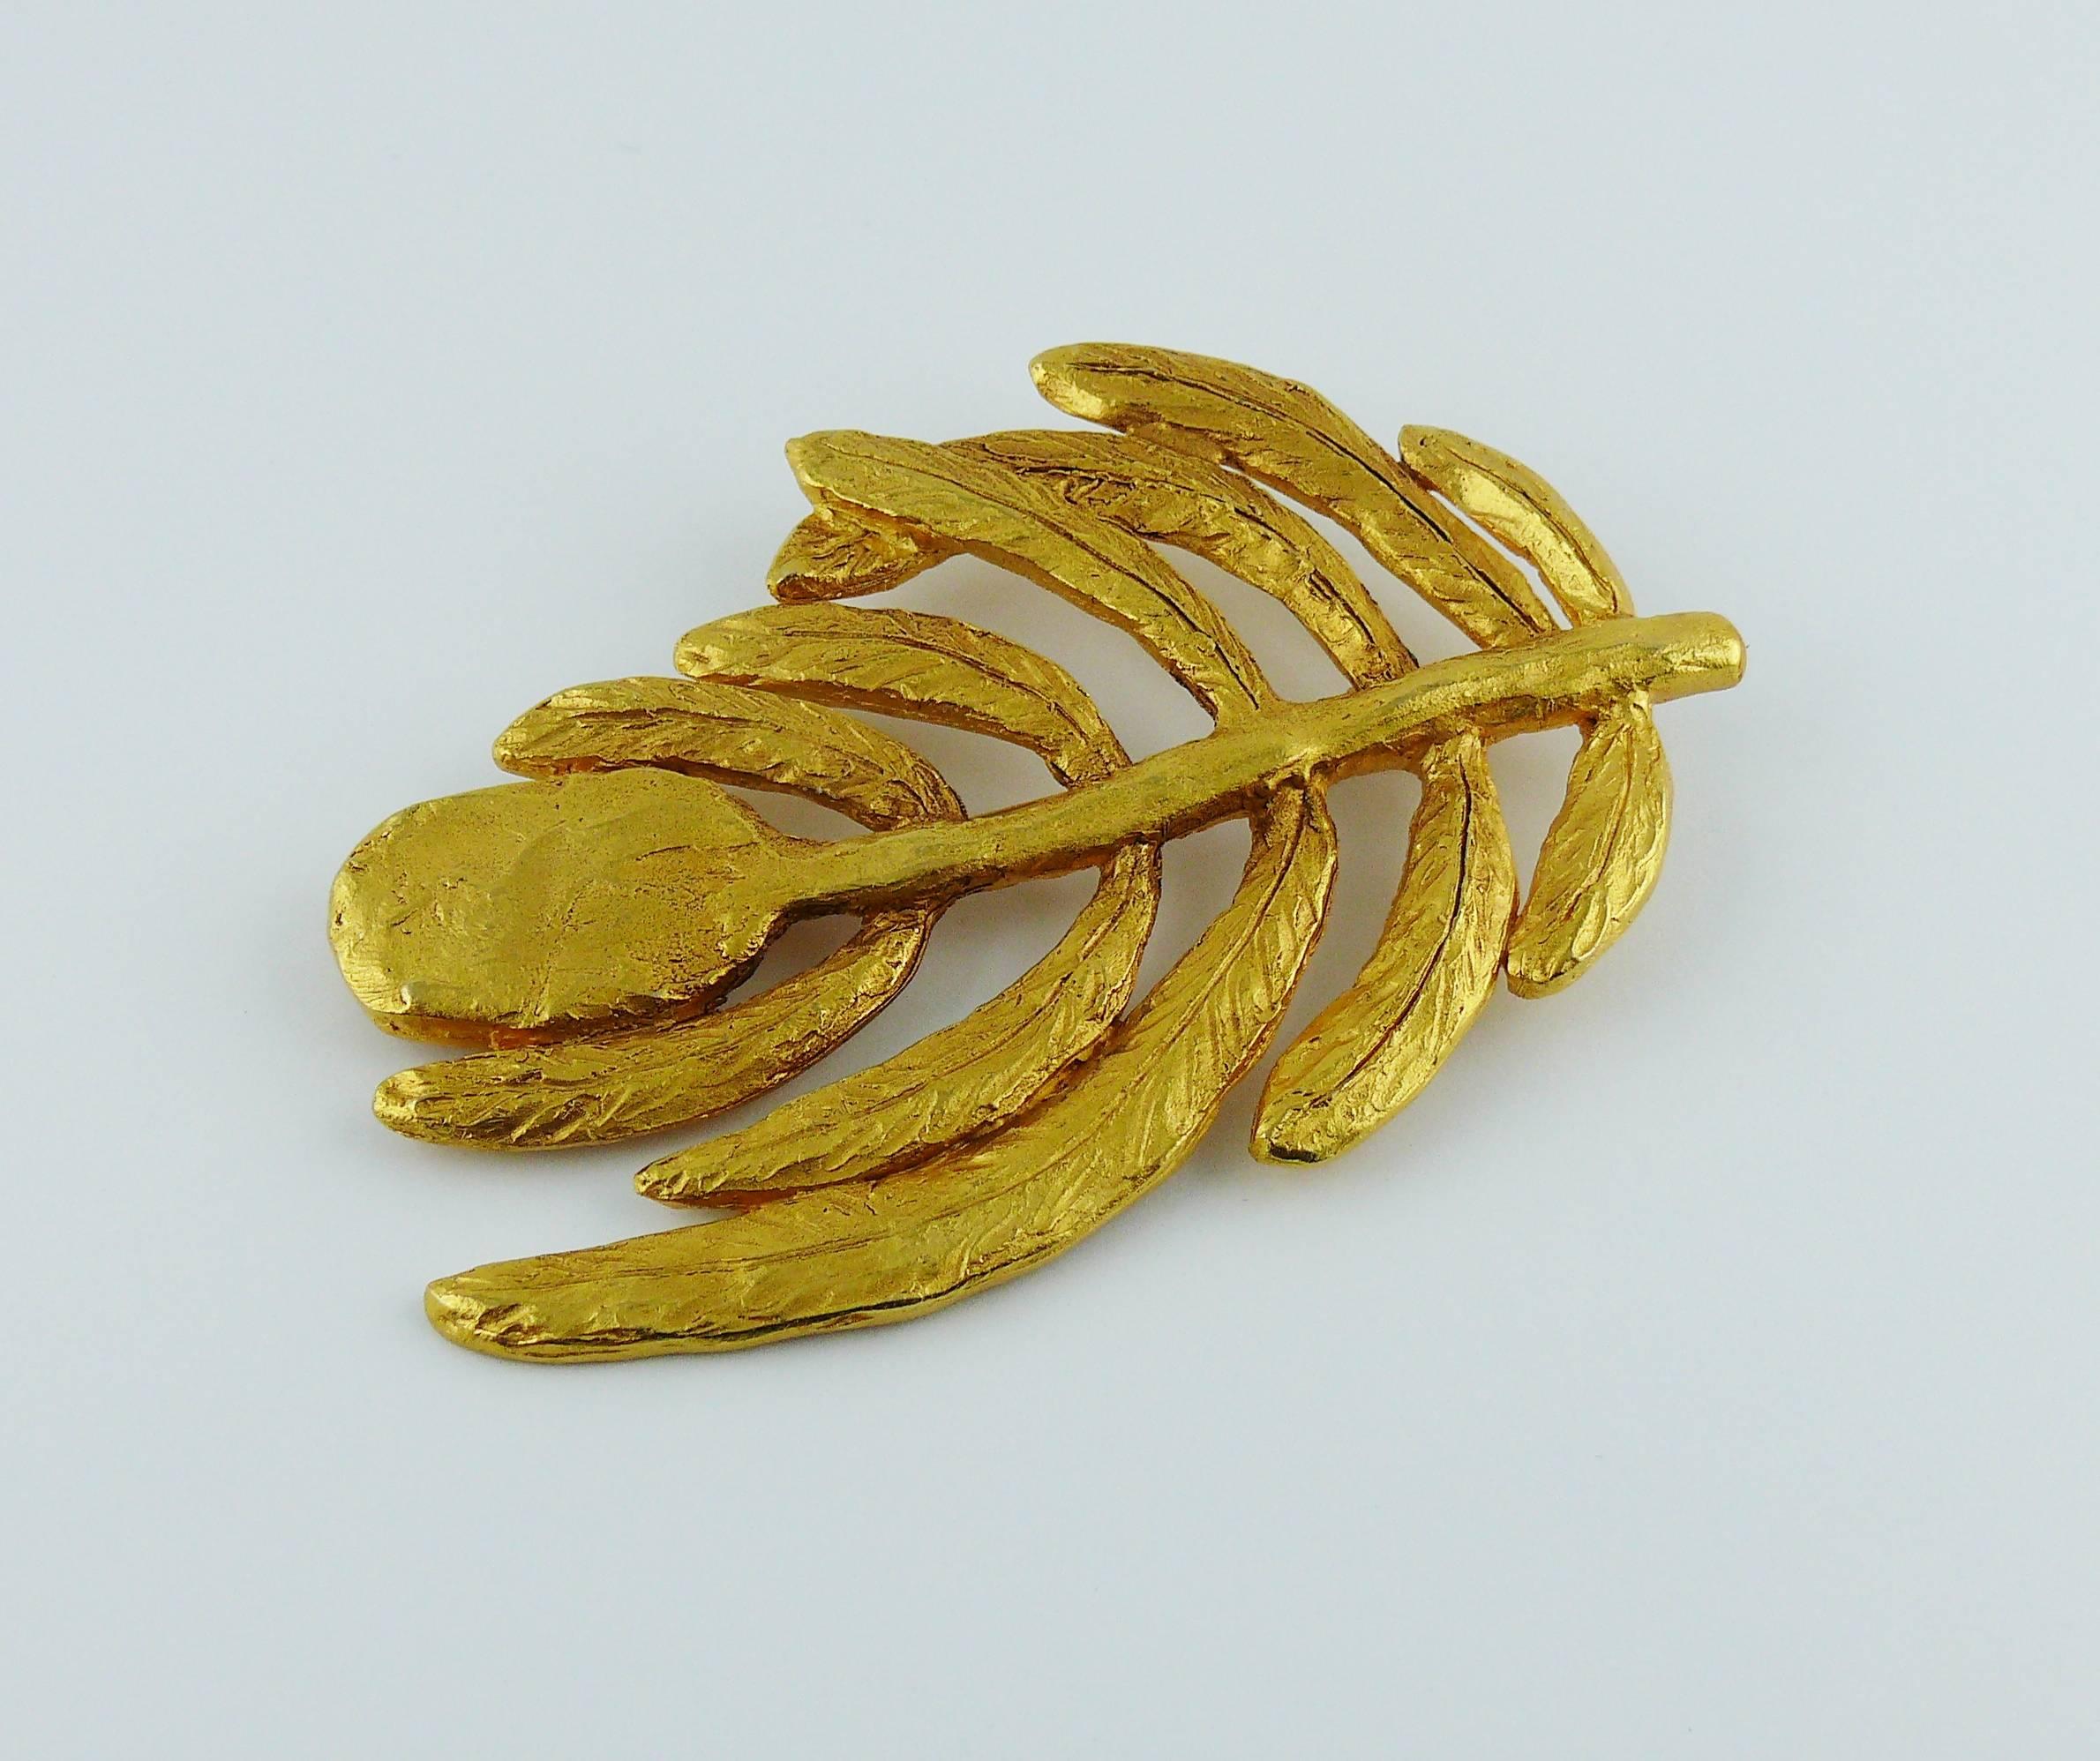 CHRISTIAN LACROIX vintage gold toned brooch featuring a textured palm.

Marked CHRISTIAN LACROIX CL Made in France.

Indicative measurements : length approx. 8.3 cm (3.27 inches) / max. width approx. 5.5 cm (2.17 inches).

JEWELRY CONDITION CHART
-